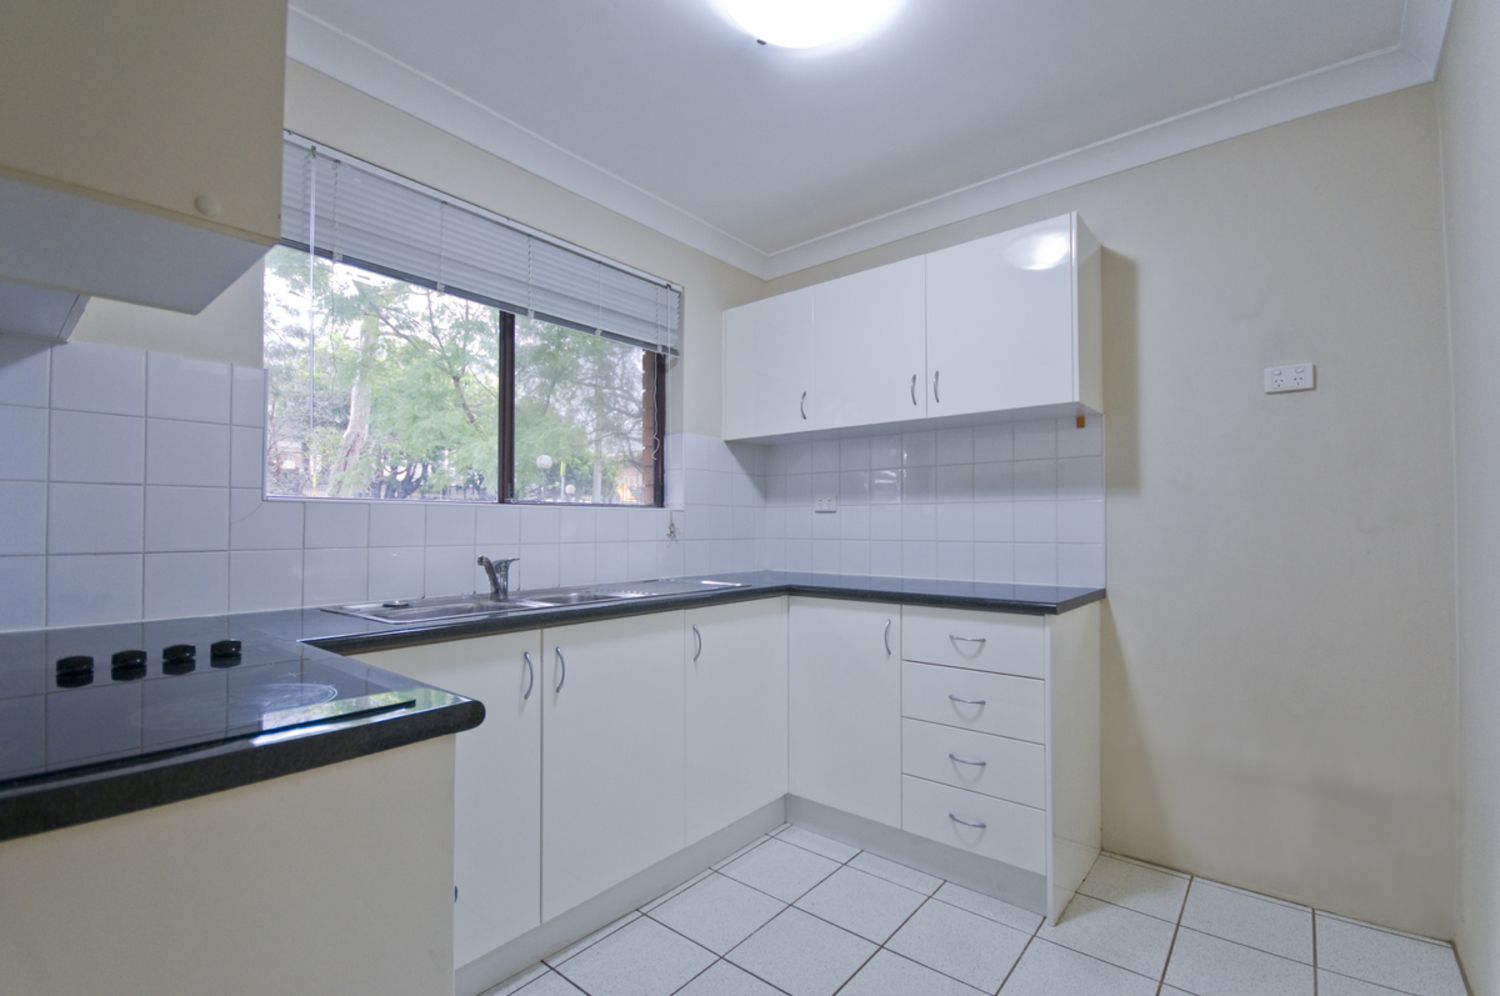 2 bedrooms Apartment / Unit / Flat in 9/56-58 Maxim Street WEST RYDE NSW, 2114